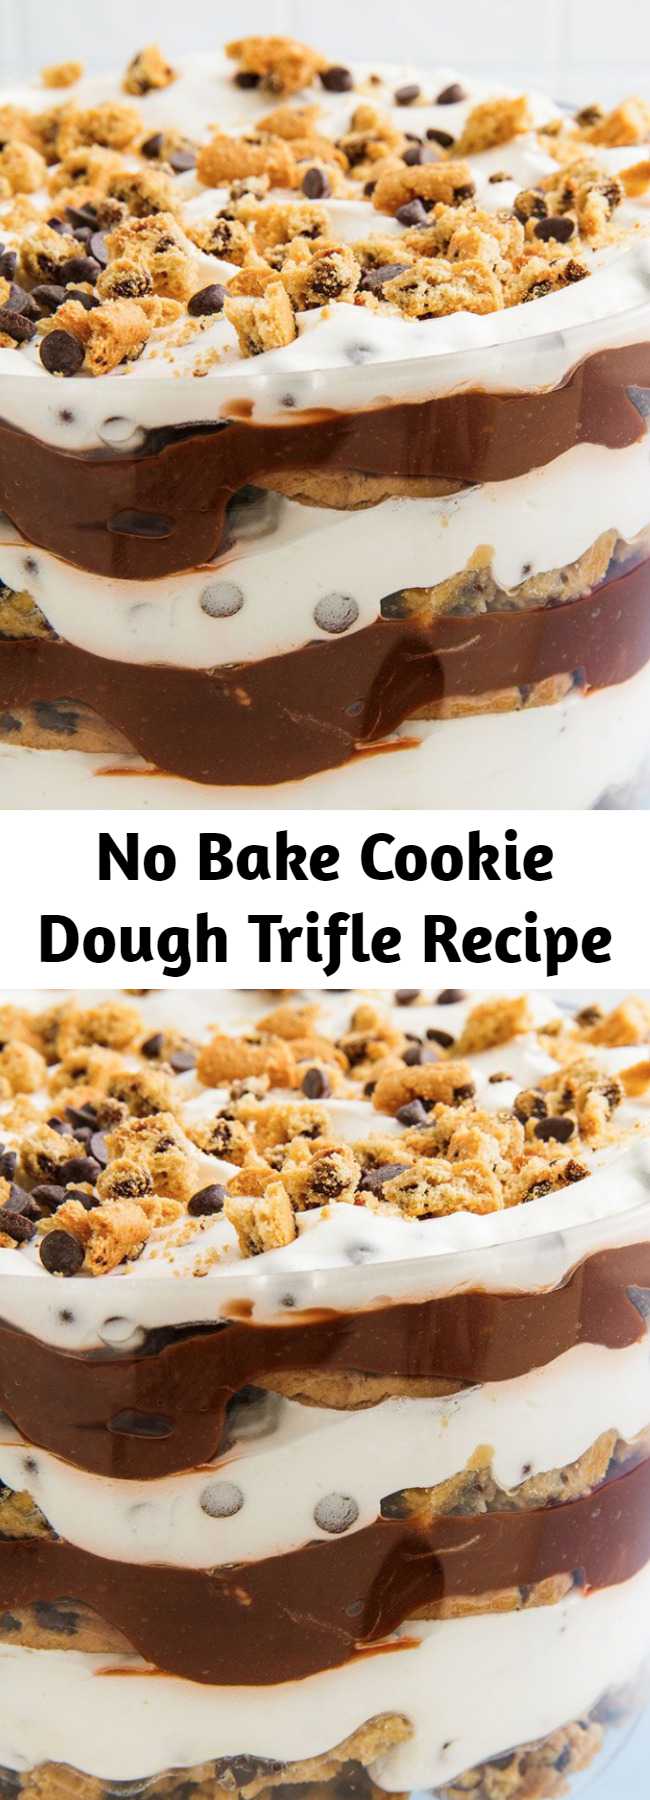 No Bake Cookie Dough Trifle Recipe - This no-bake treat is every cookie dough lover's dream. The best part? The cookie dough is eggless, flour-free, and 100% safe to eat. YOU'RE WELCOME. #easy #recipe #cookie #dough #cookiedough #nobake #dessert #chocolate #foracrowd